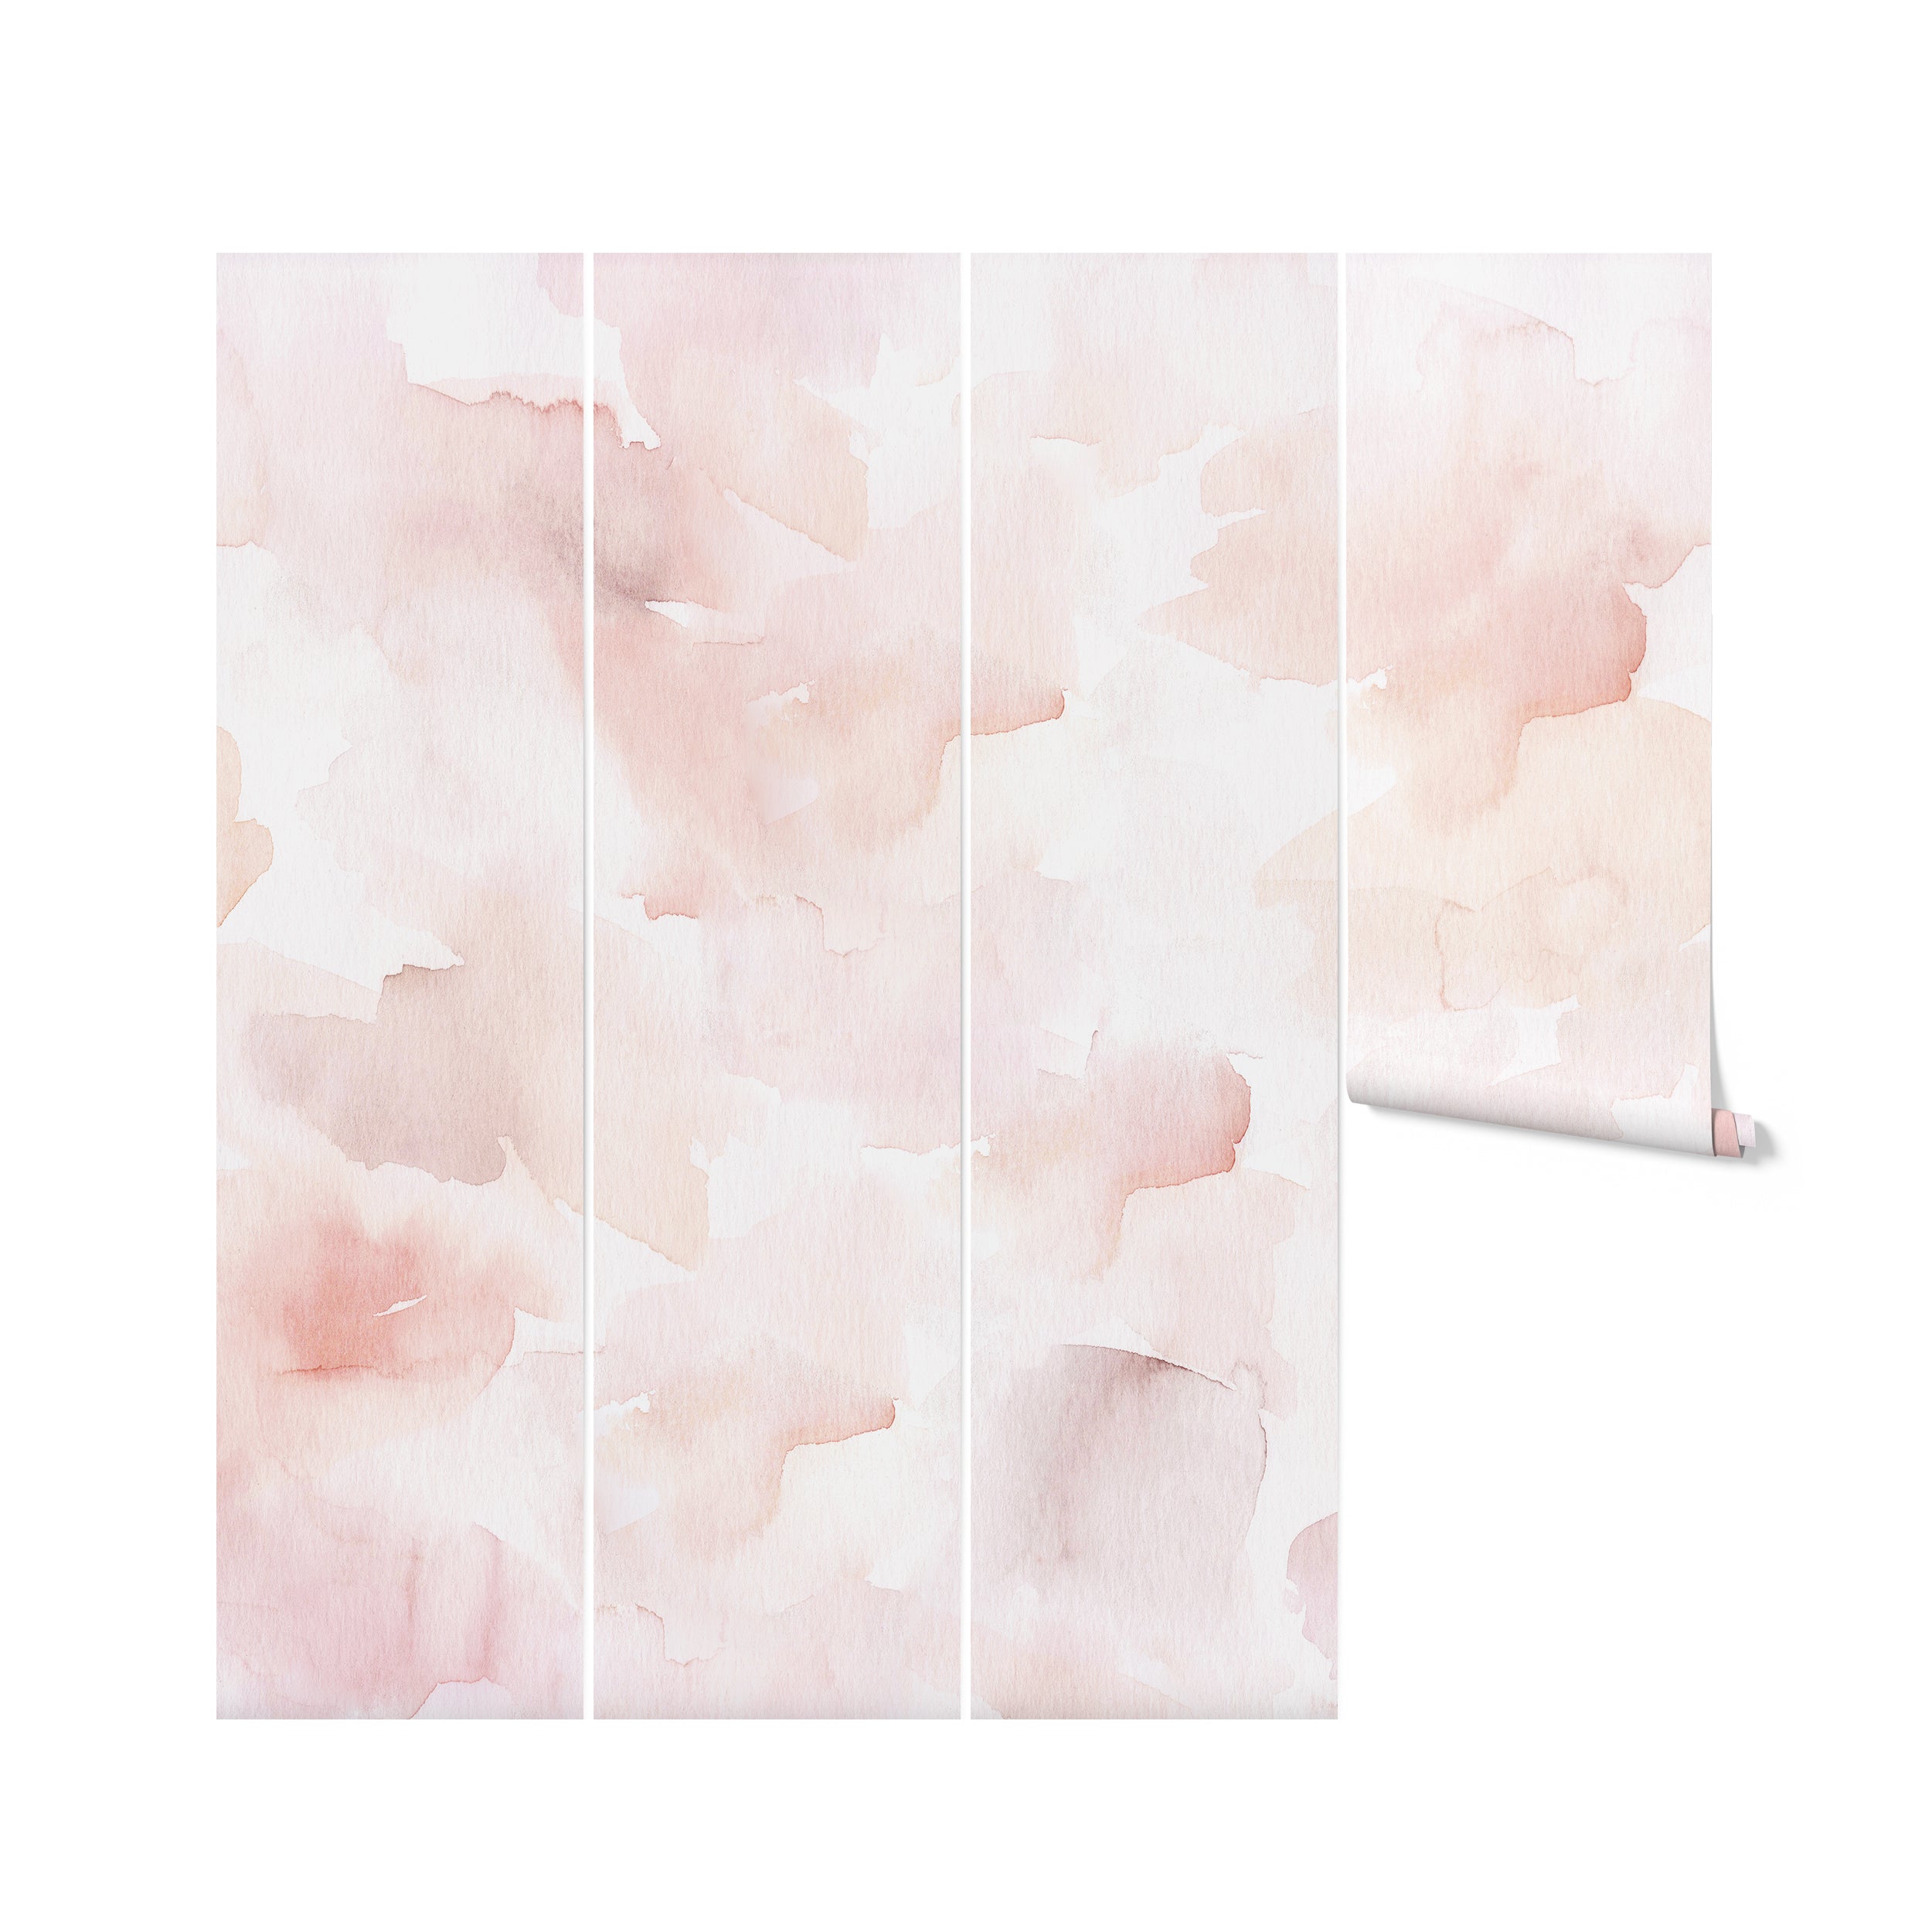 A detailed view of the Hand Painted Mural Wallpaper, showcasing its unique abstract watercolor strokes in shades of pink and cream, creating a dreamy and organic feel, perfect for a statement wall in any contemporary home.